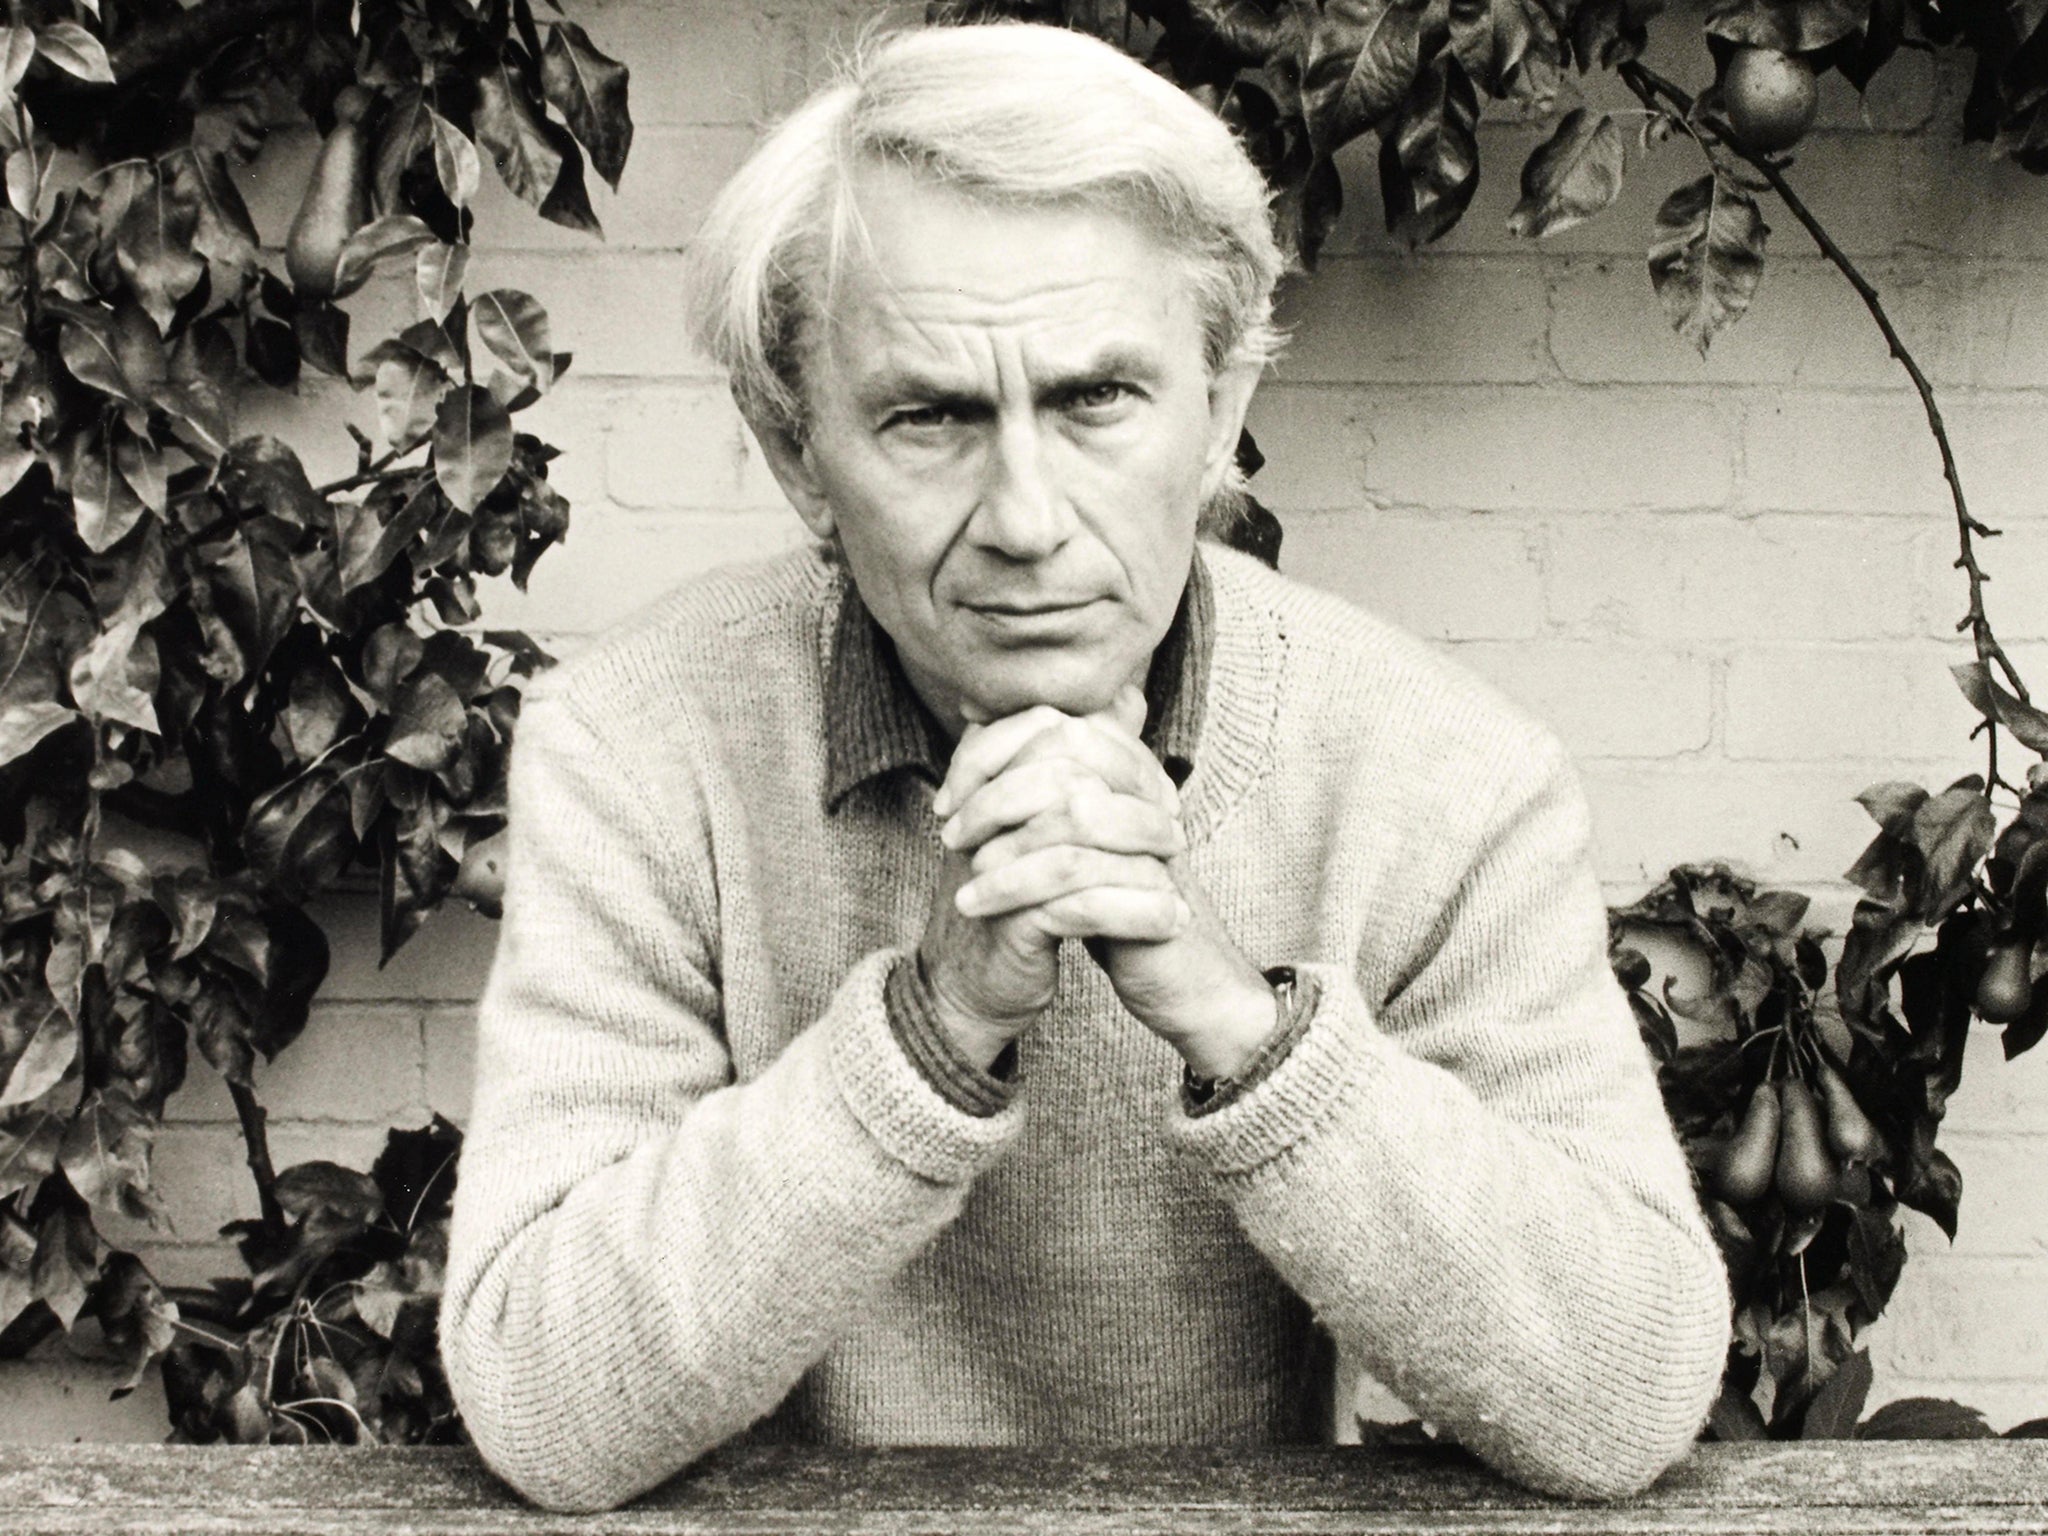 The poet in 1986, the same year he was chair of the Booker Prize judges